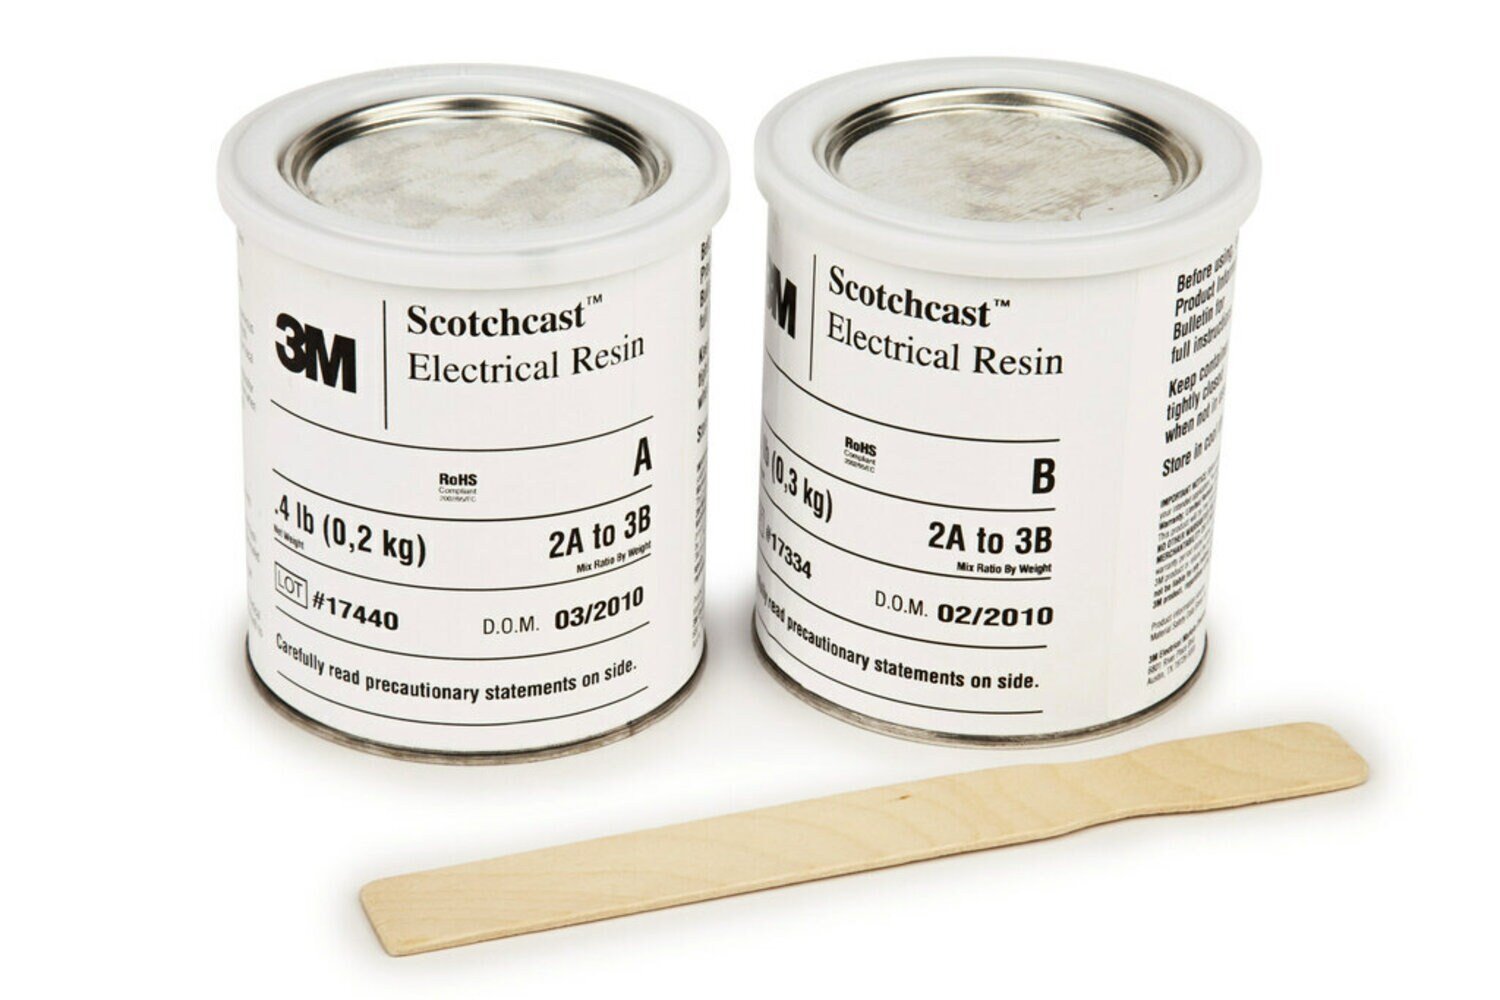 7010401201 - 3M Scotchcast Electrical Resin 208N, 8-lb kit (two 1-gal cans, 2
paddles), 1 Kits/Case